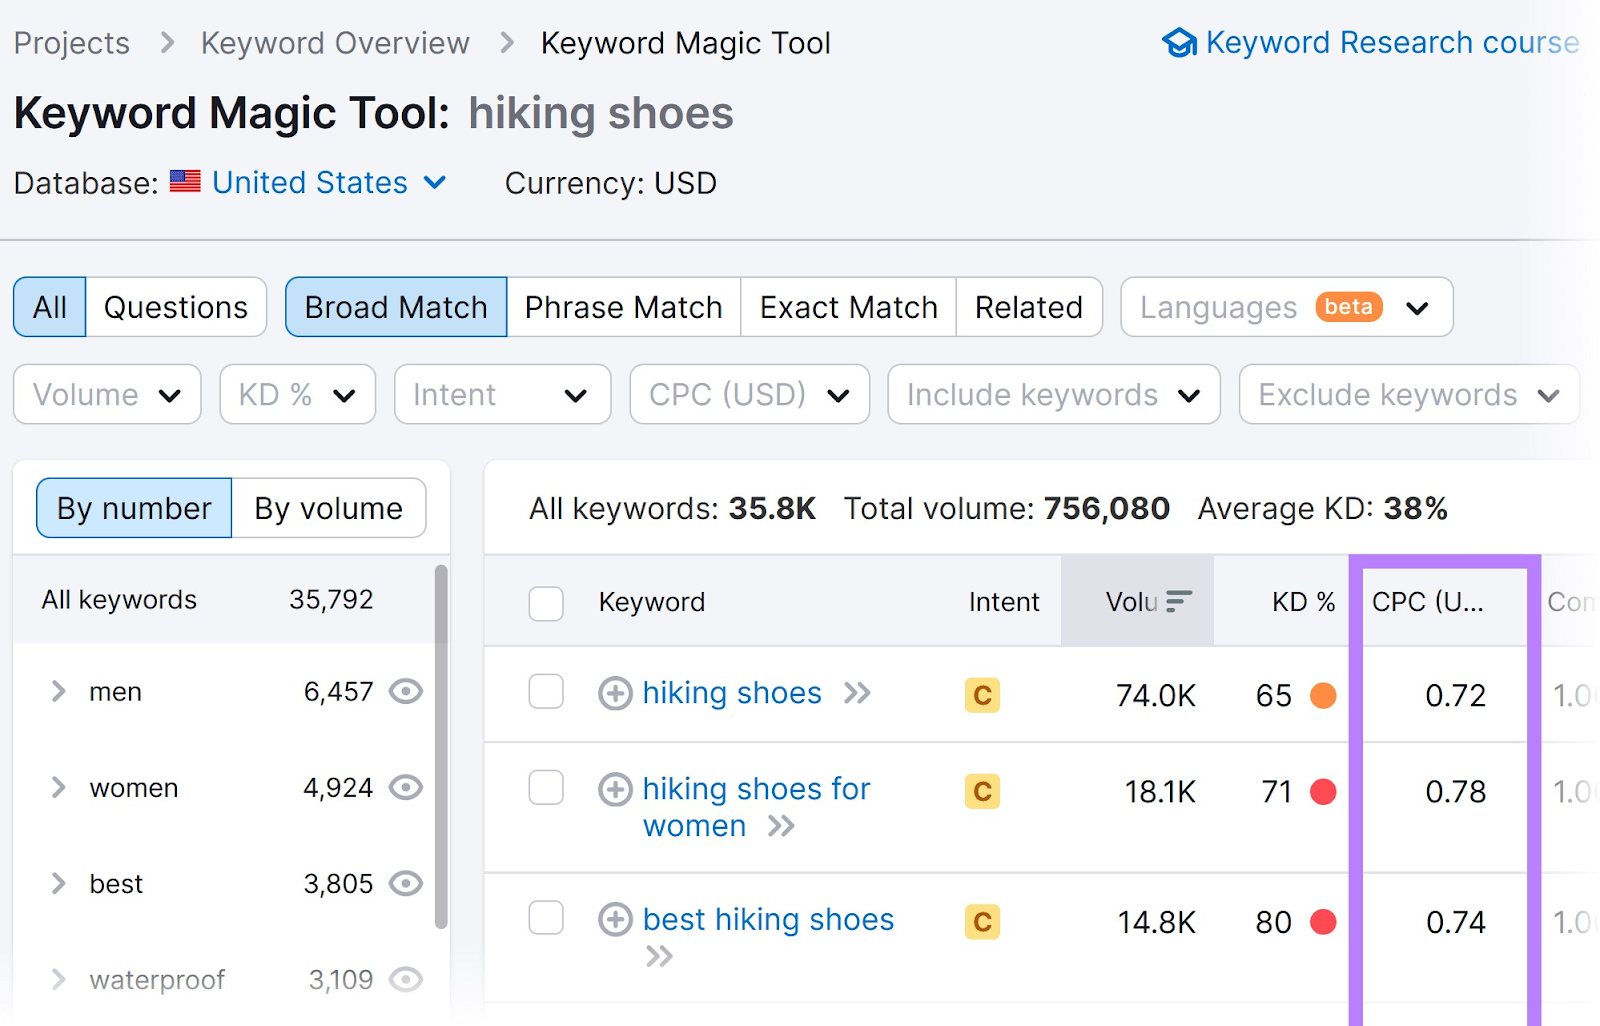 “CPC” column highlighted in Keyword Magic Tool results for "hiking shoes" keywords